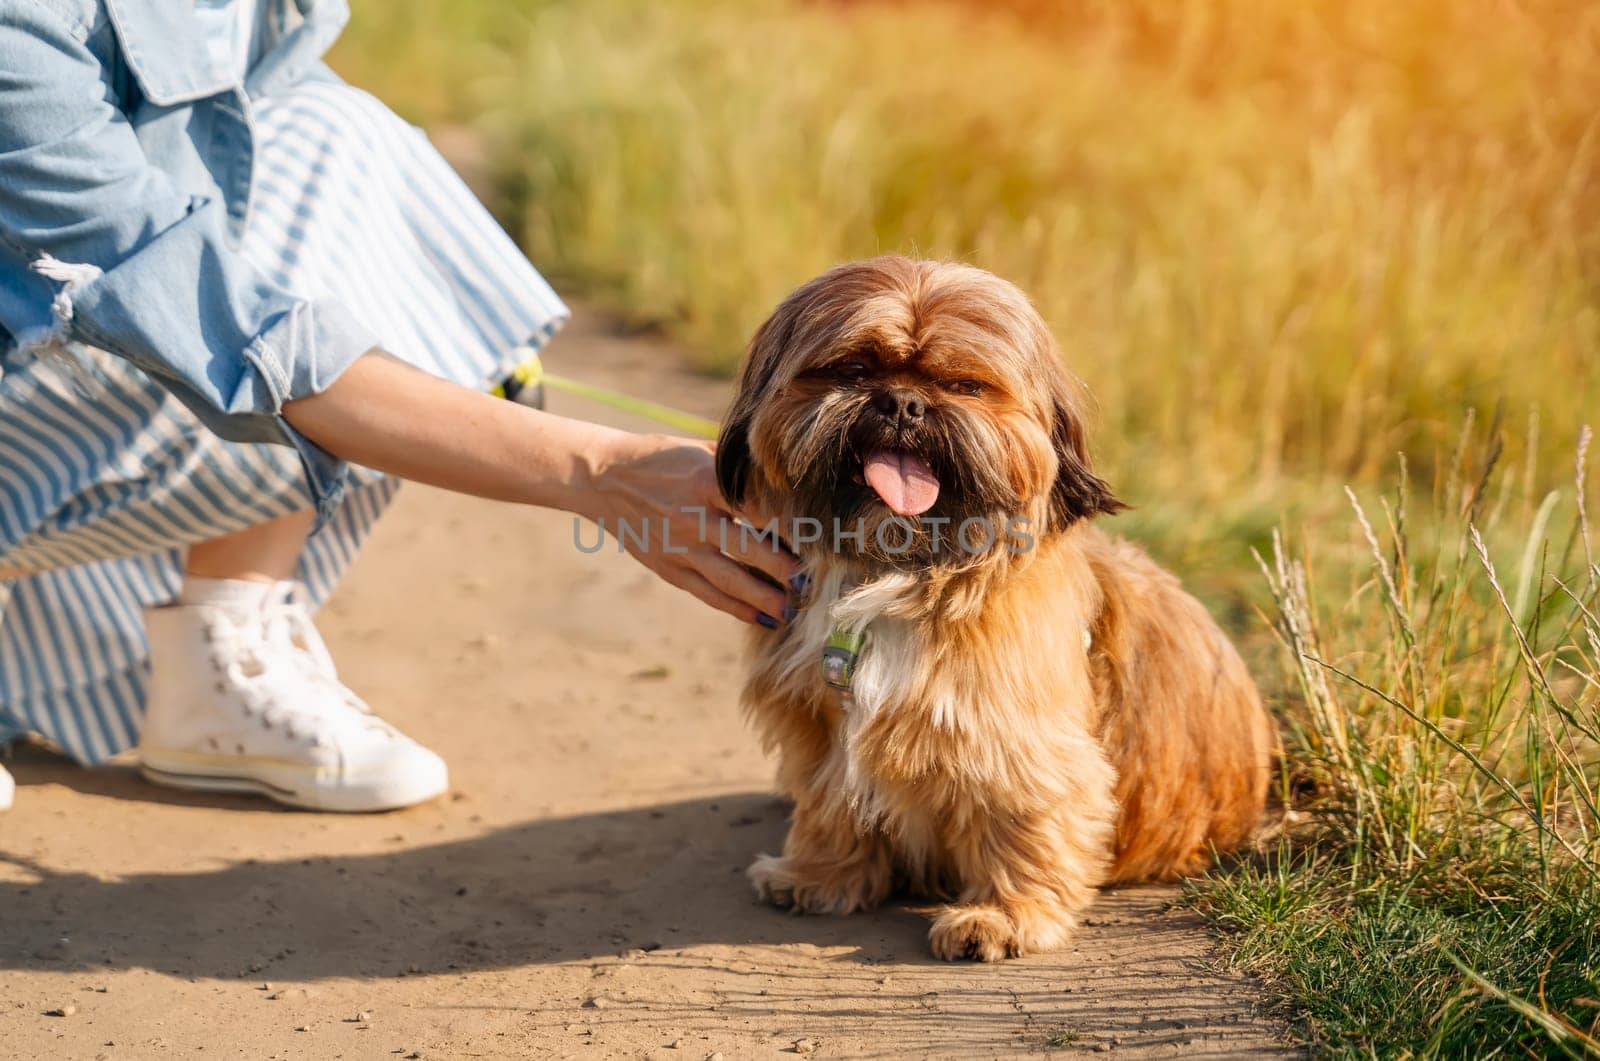 woman having fun and relaxing time with shih tzu dog. Free and happy time with pet concept by Iryna_Melnyk